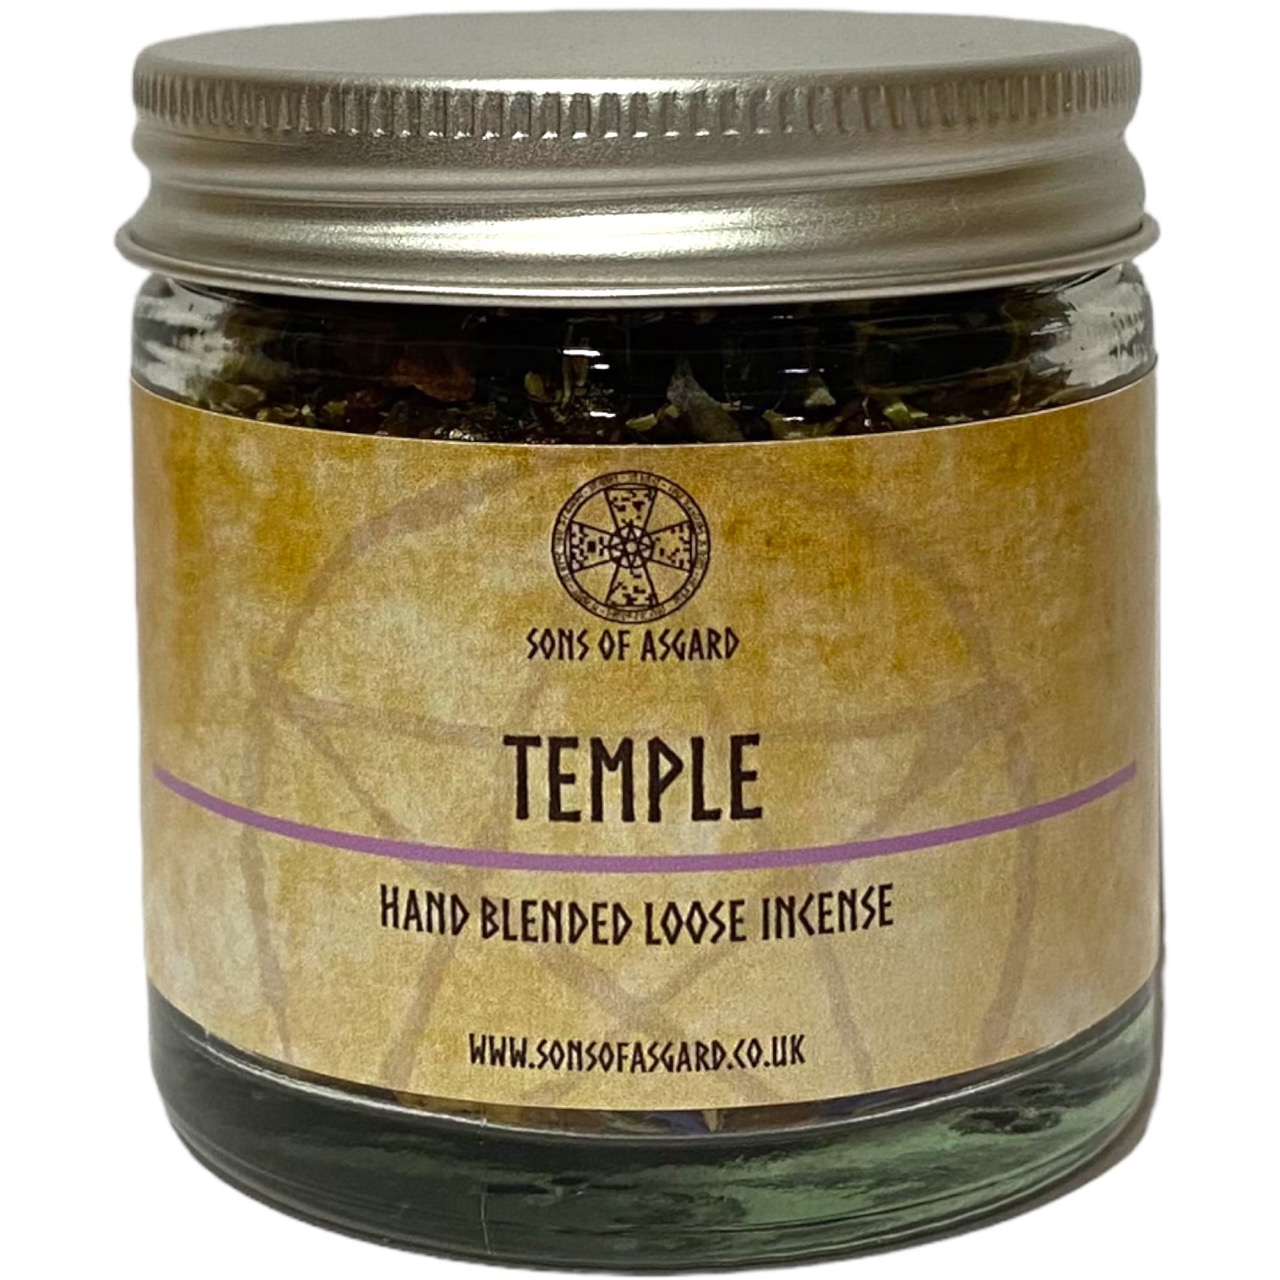 Temple - Blended Loose Incense